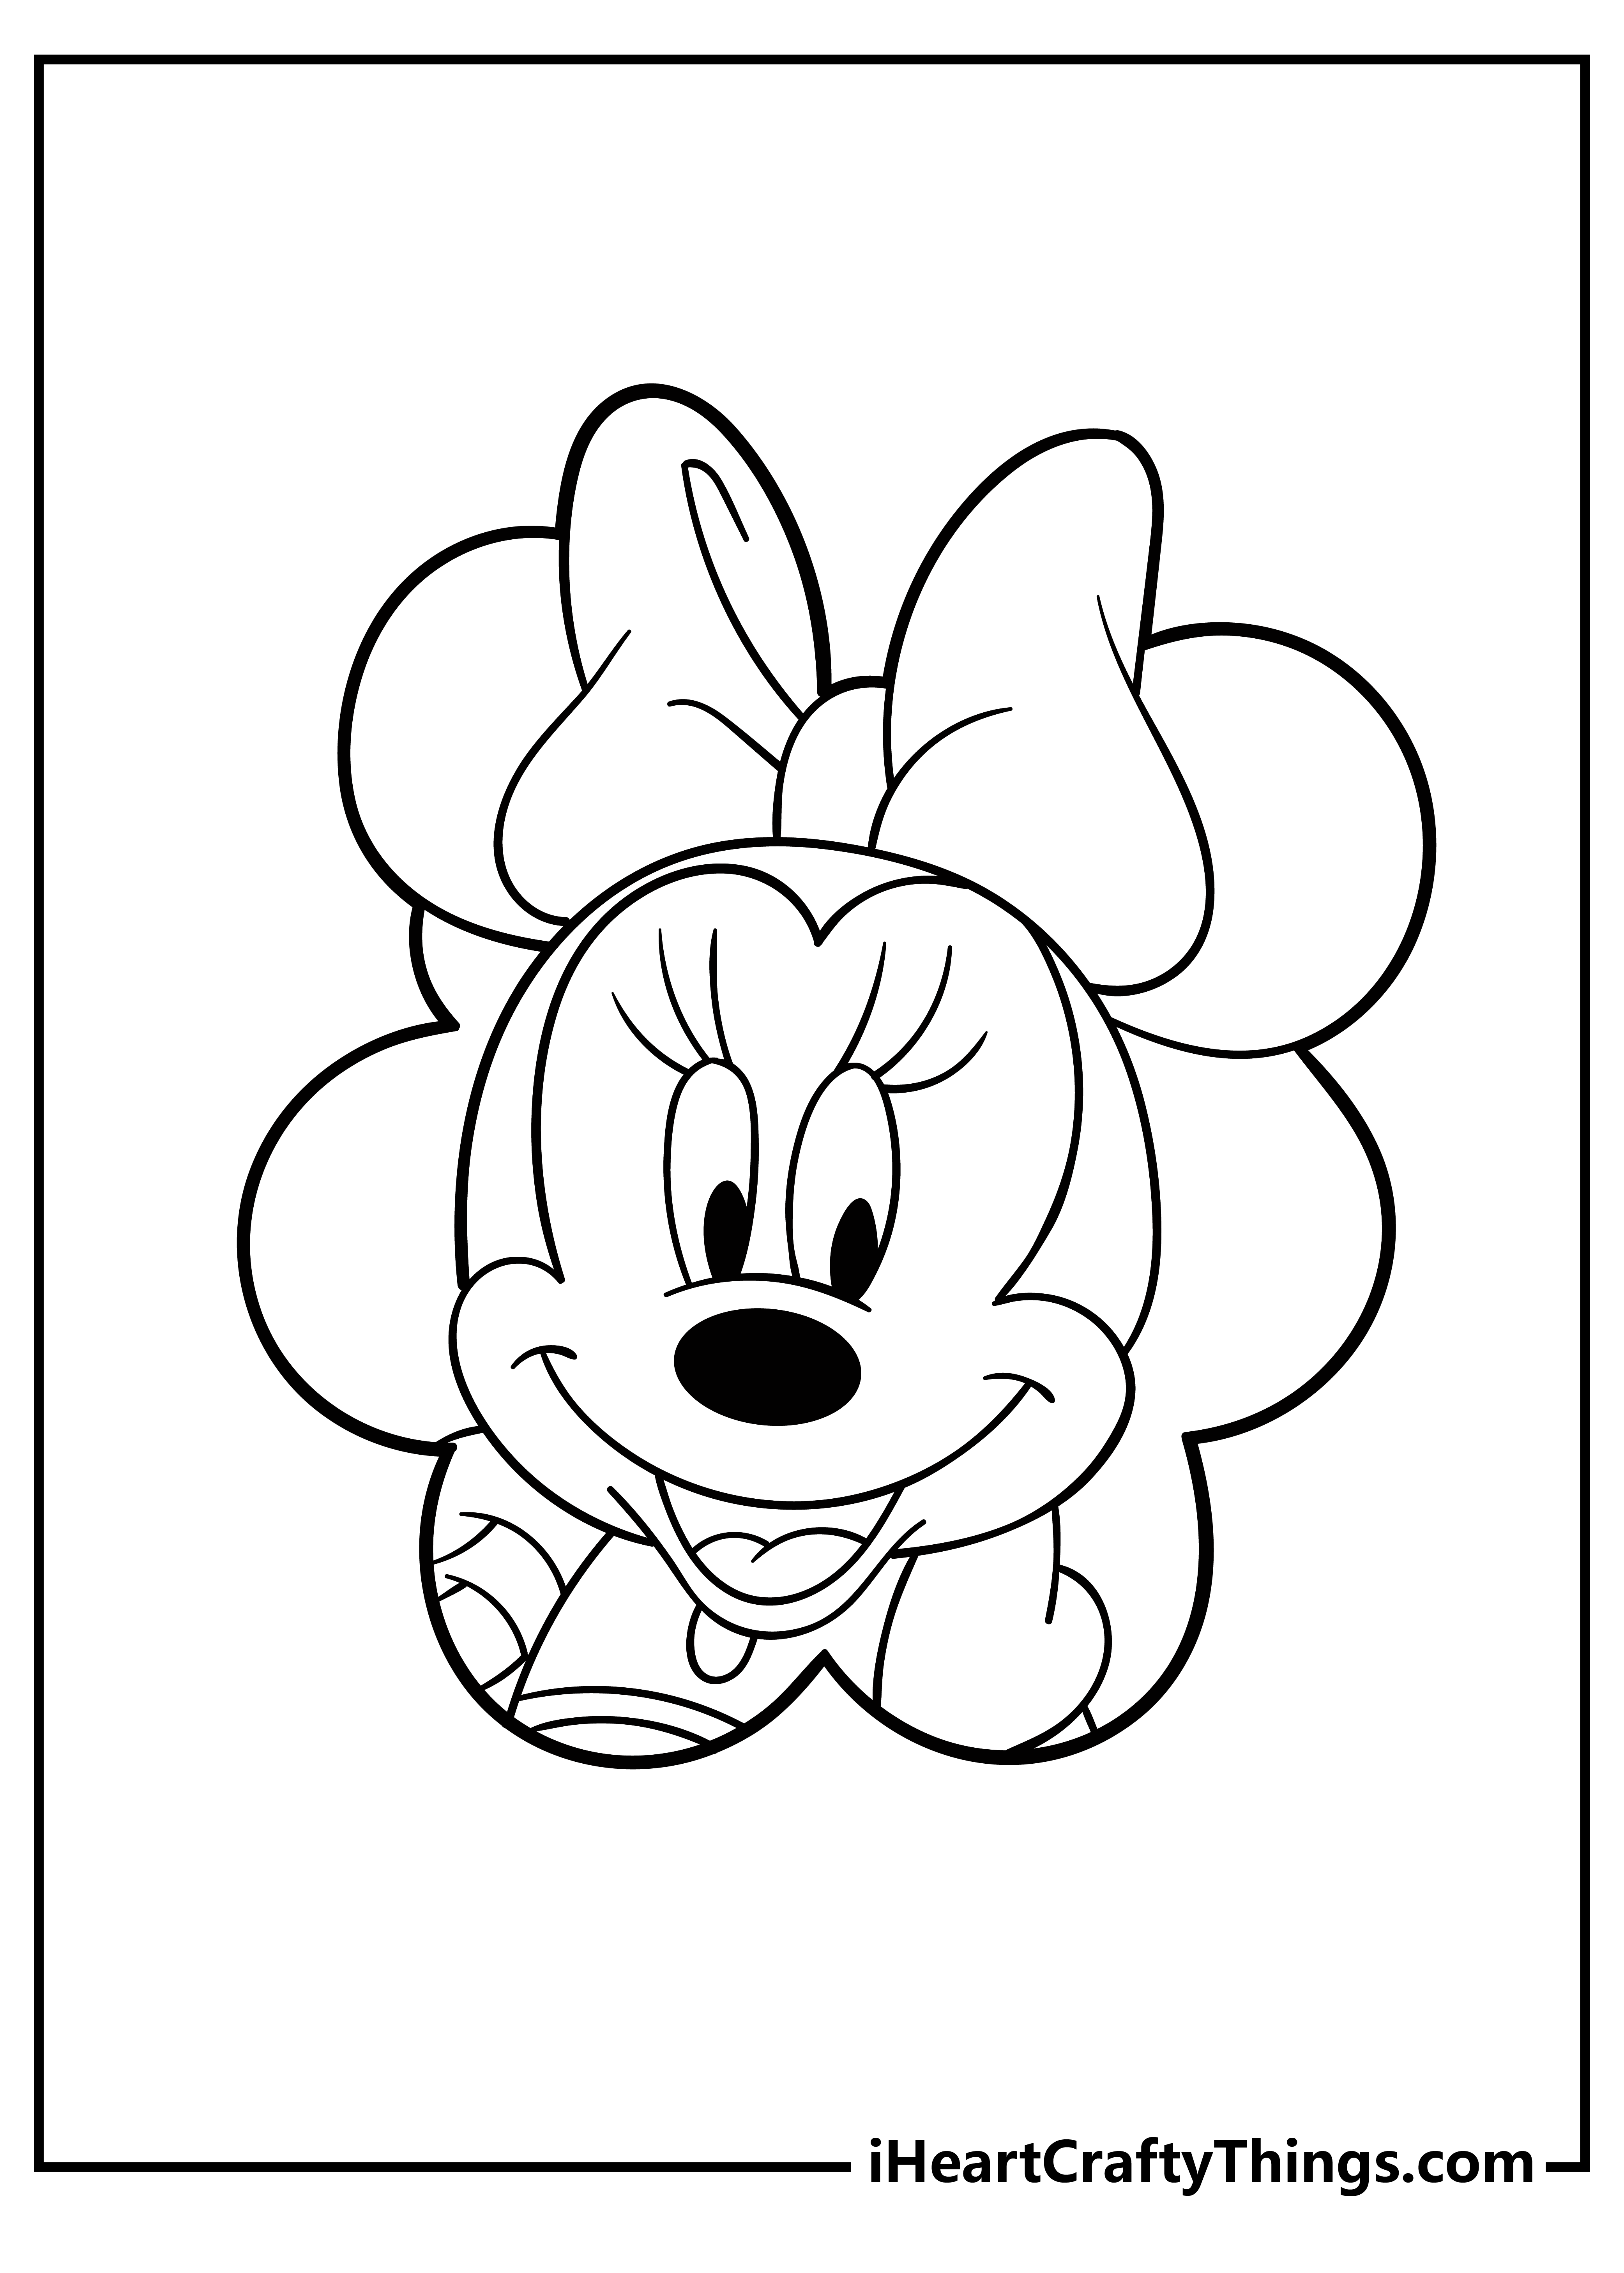 Minnie Mouse Coloring Pages for adults free printable